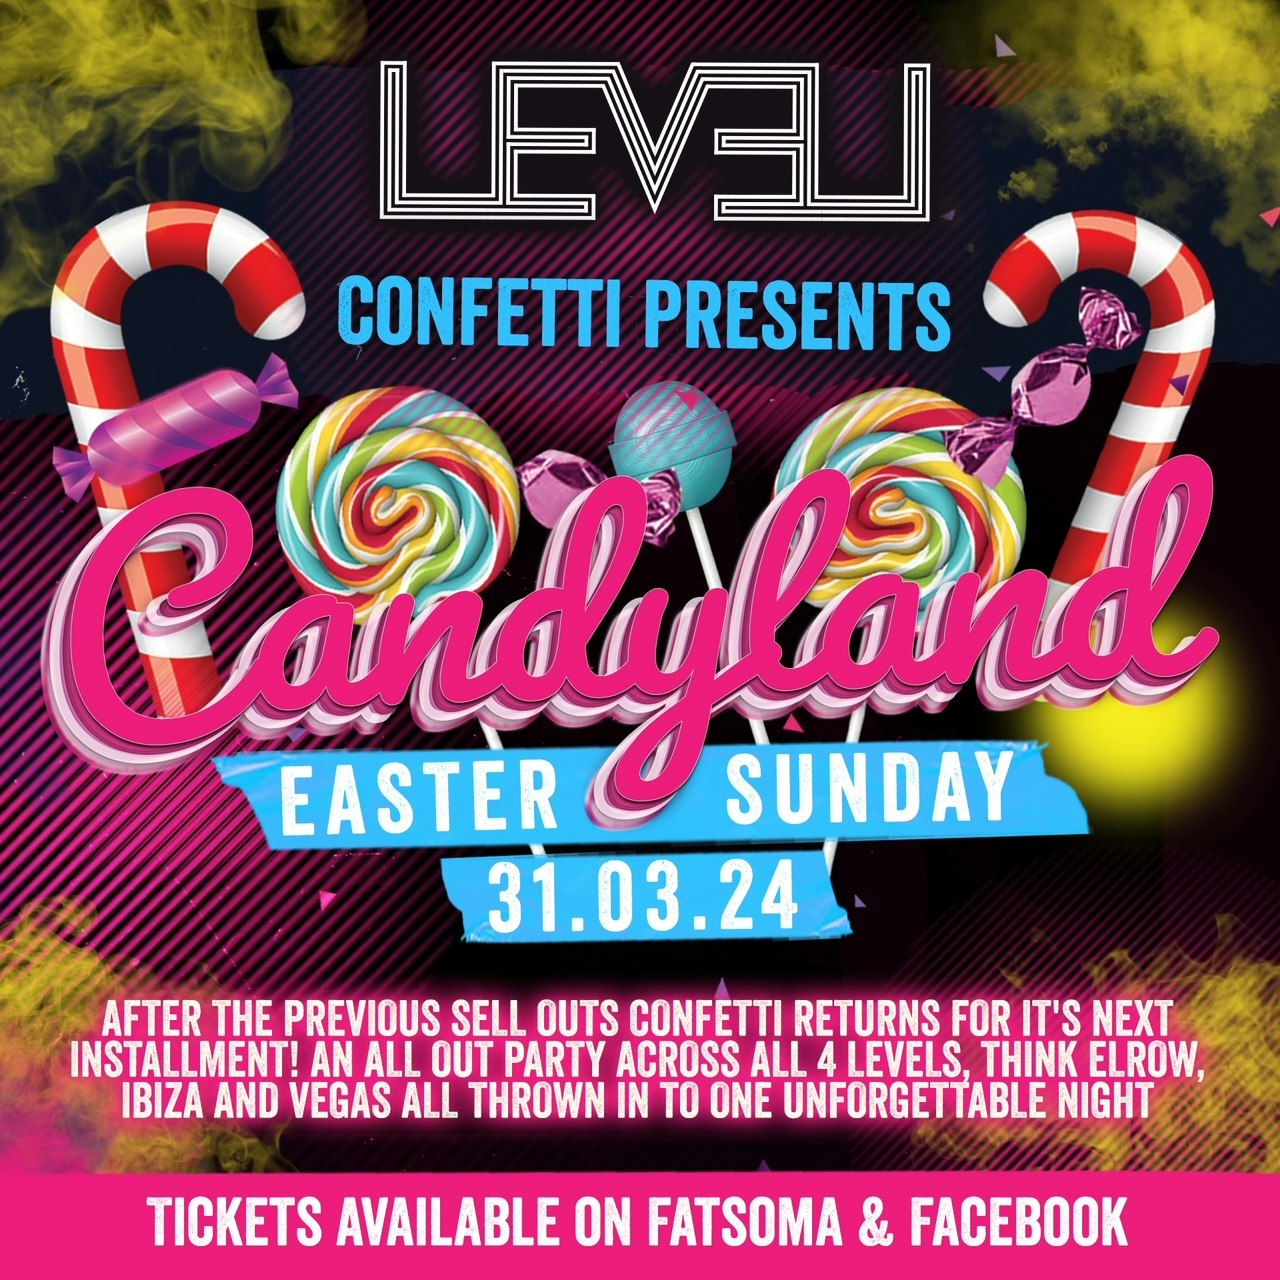 EASTER Bank Holiday Sunday Confetti Presents Candy Land